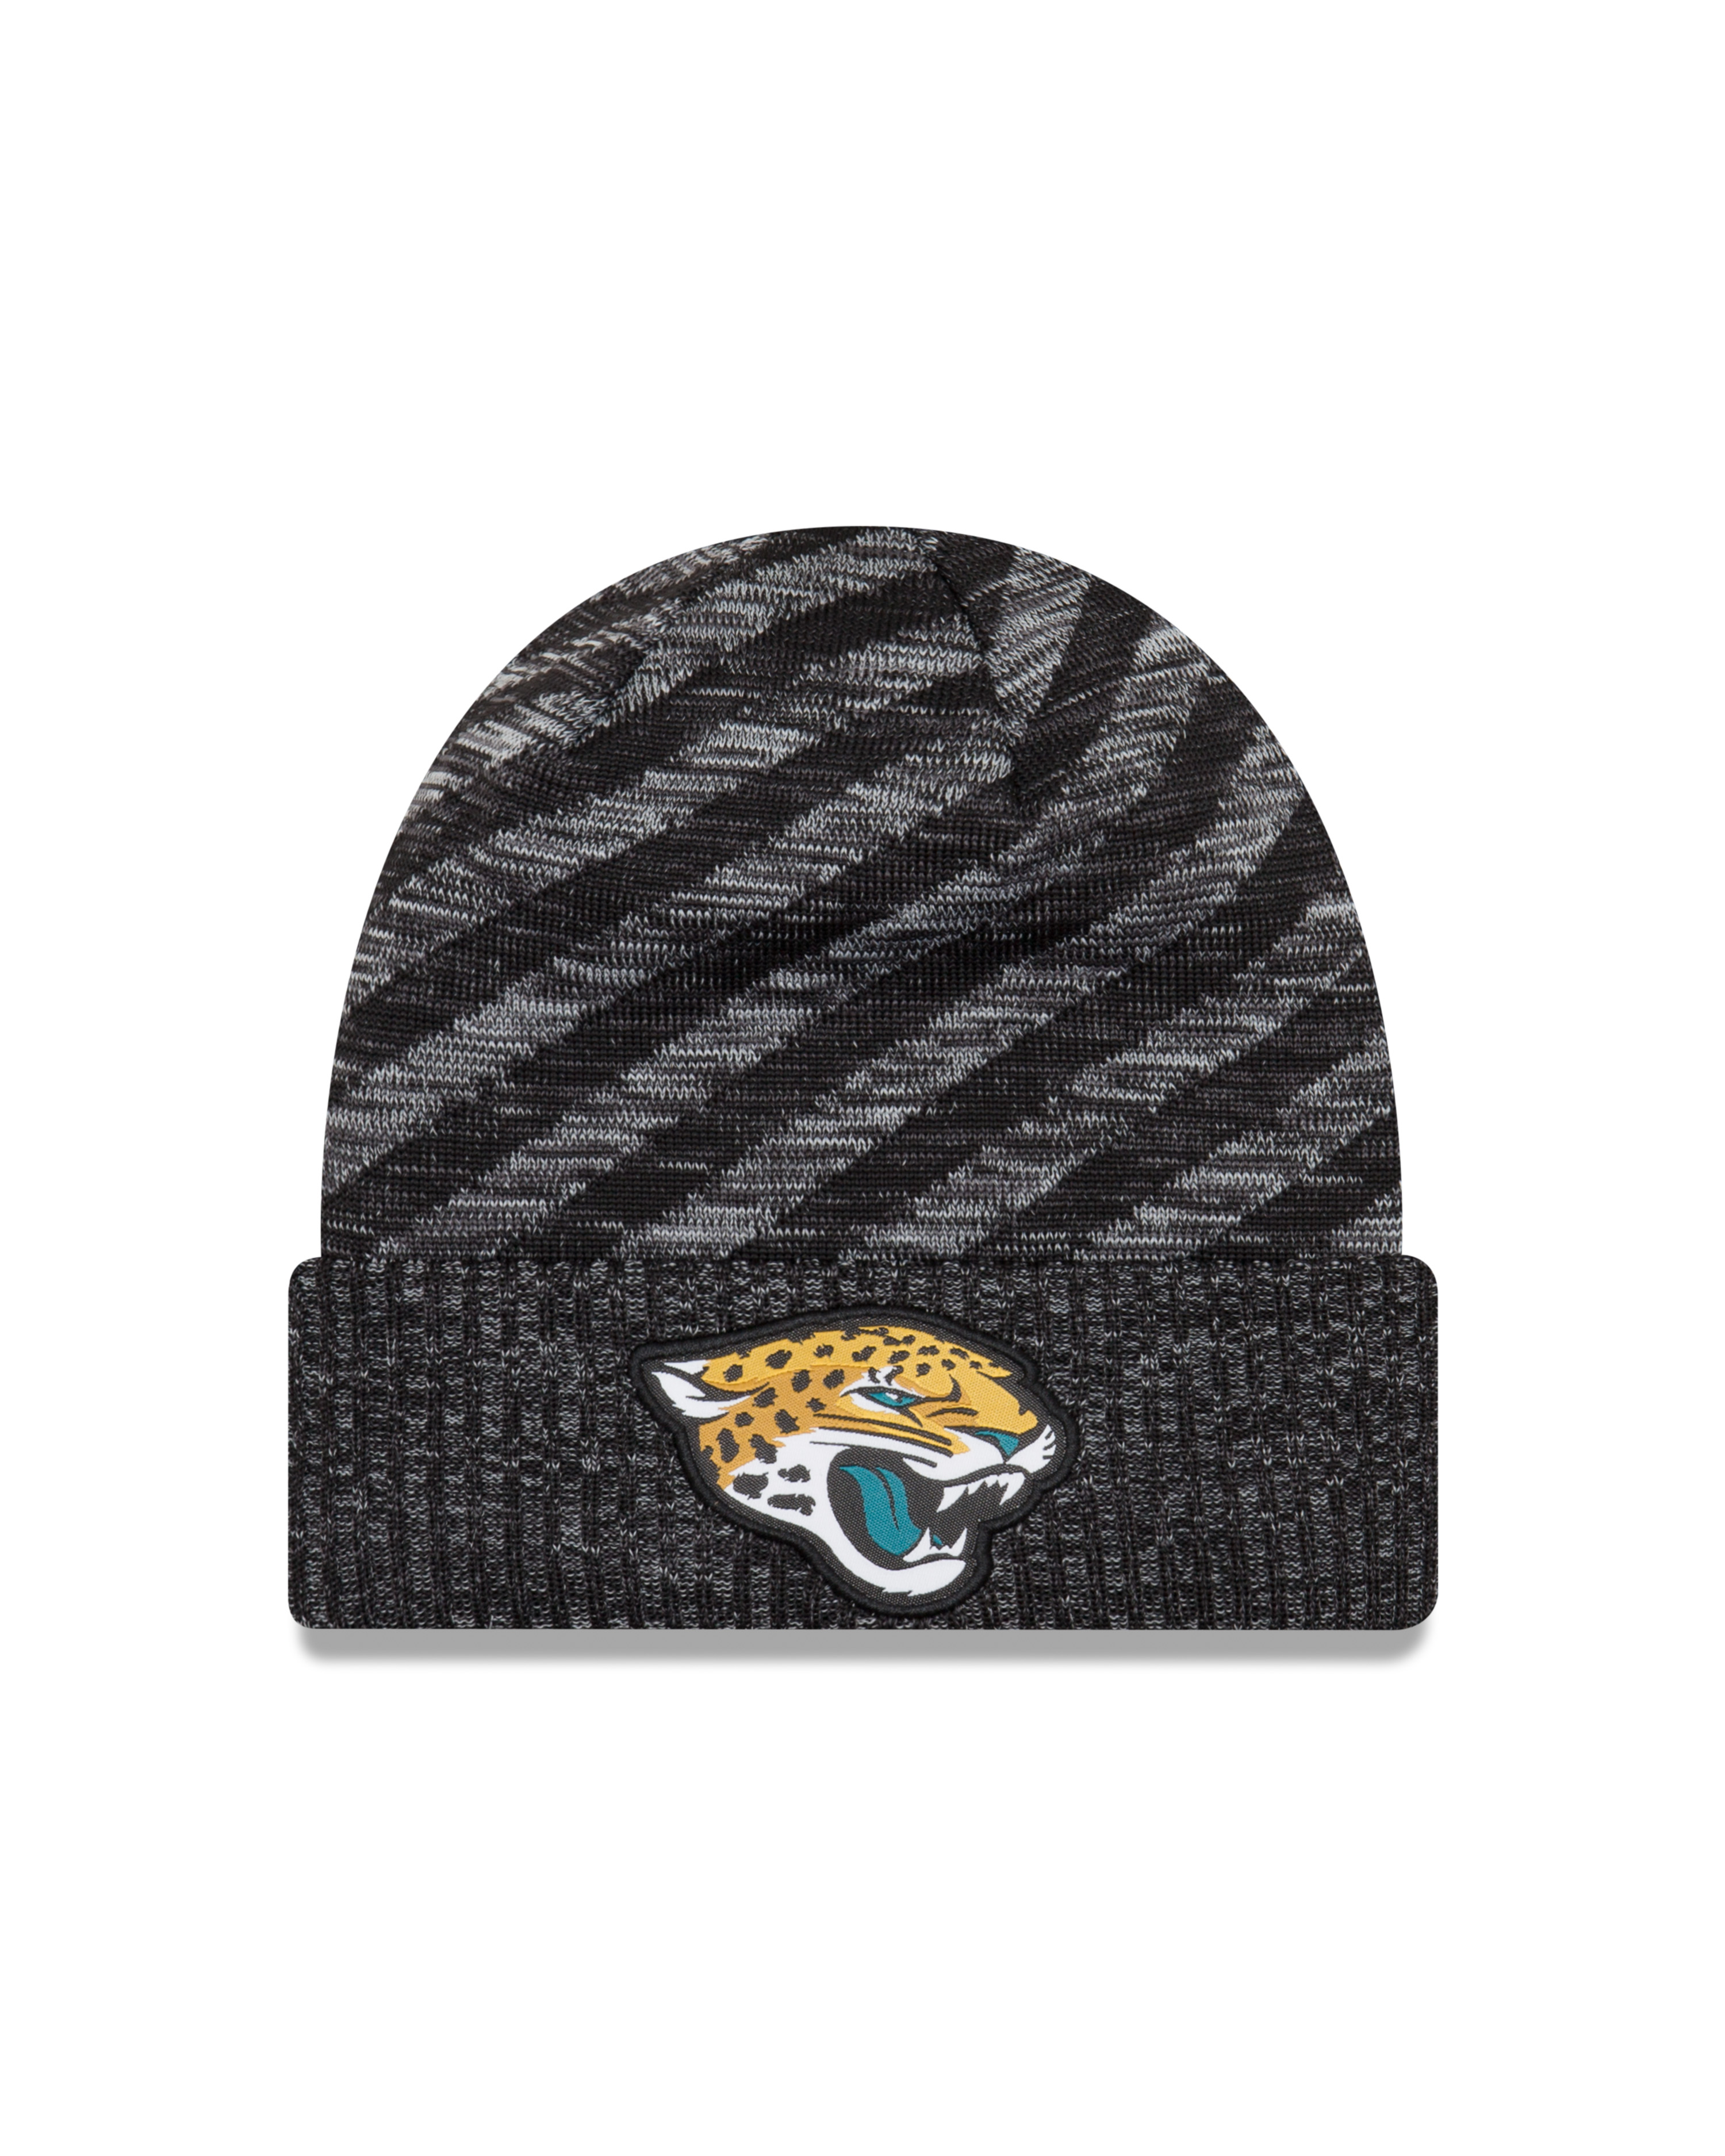 New Era Official NFL Cold Weather Collection #17